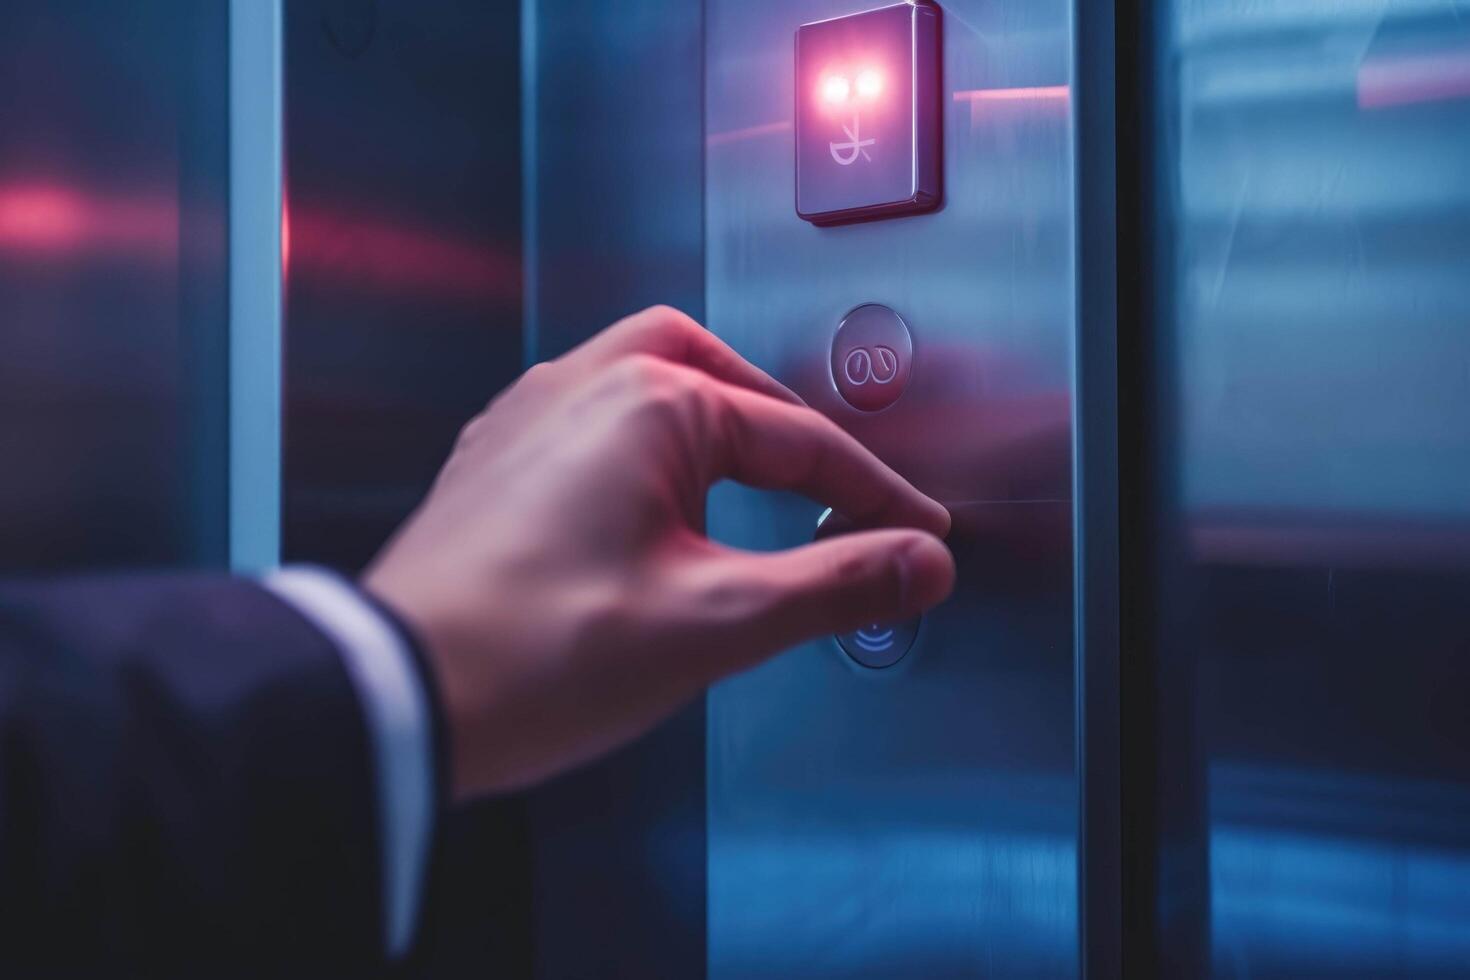 AI generated a person pressing a button on an elevator photo